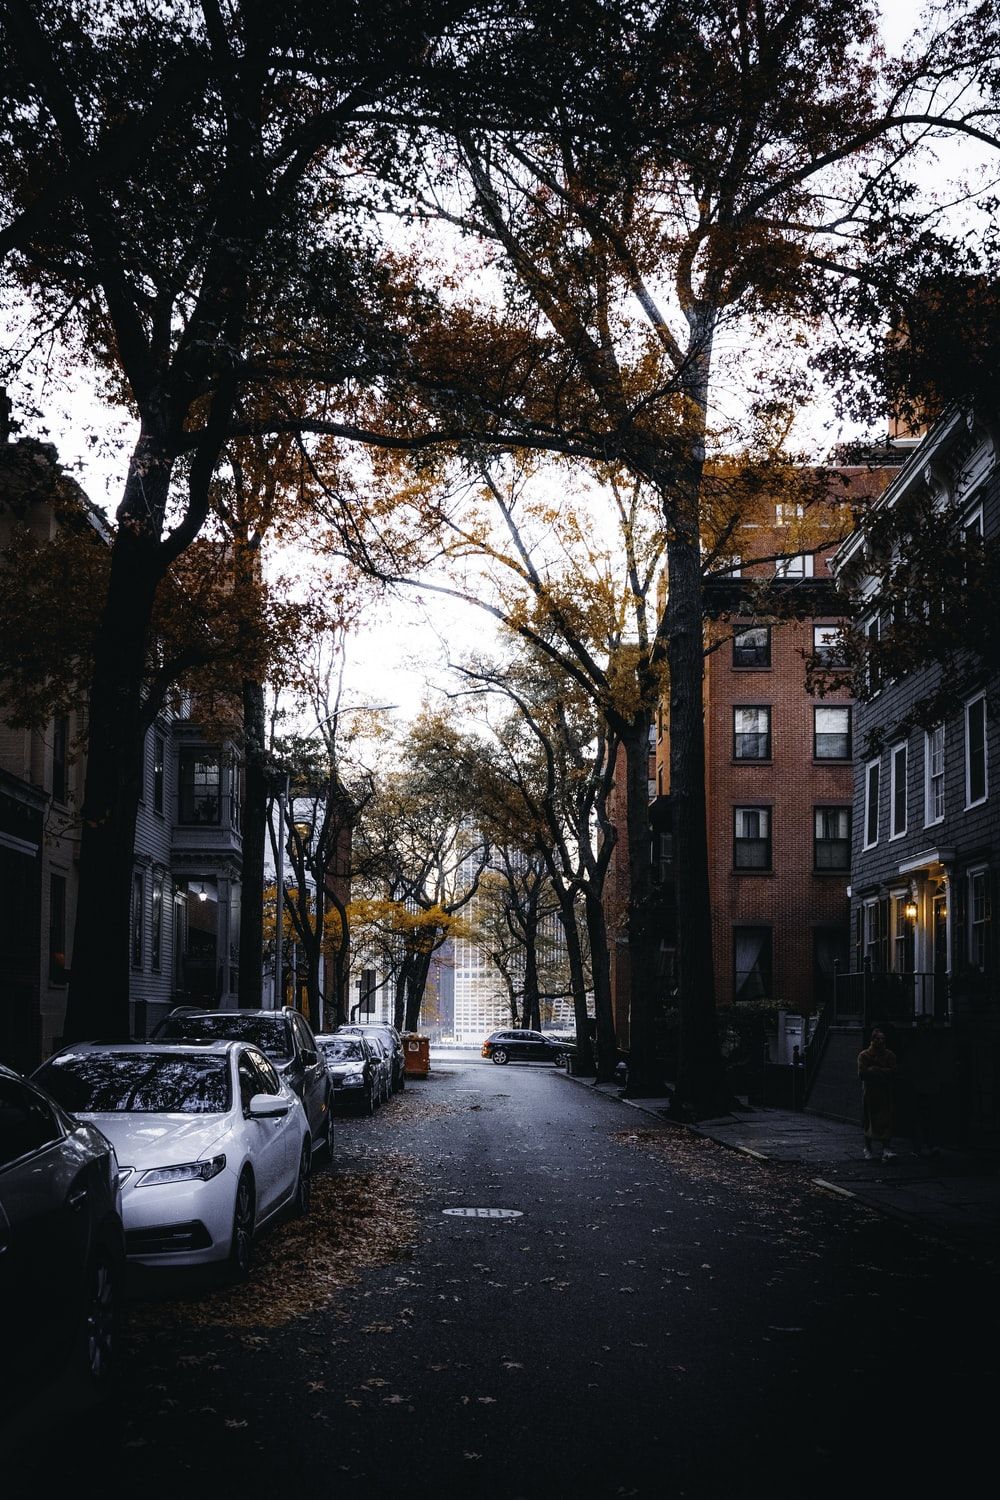 Autumn Street Picture. Download Free Image